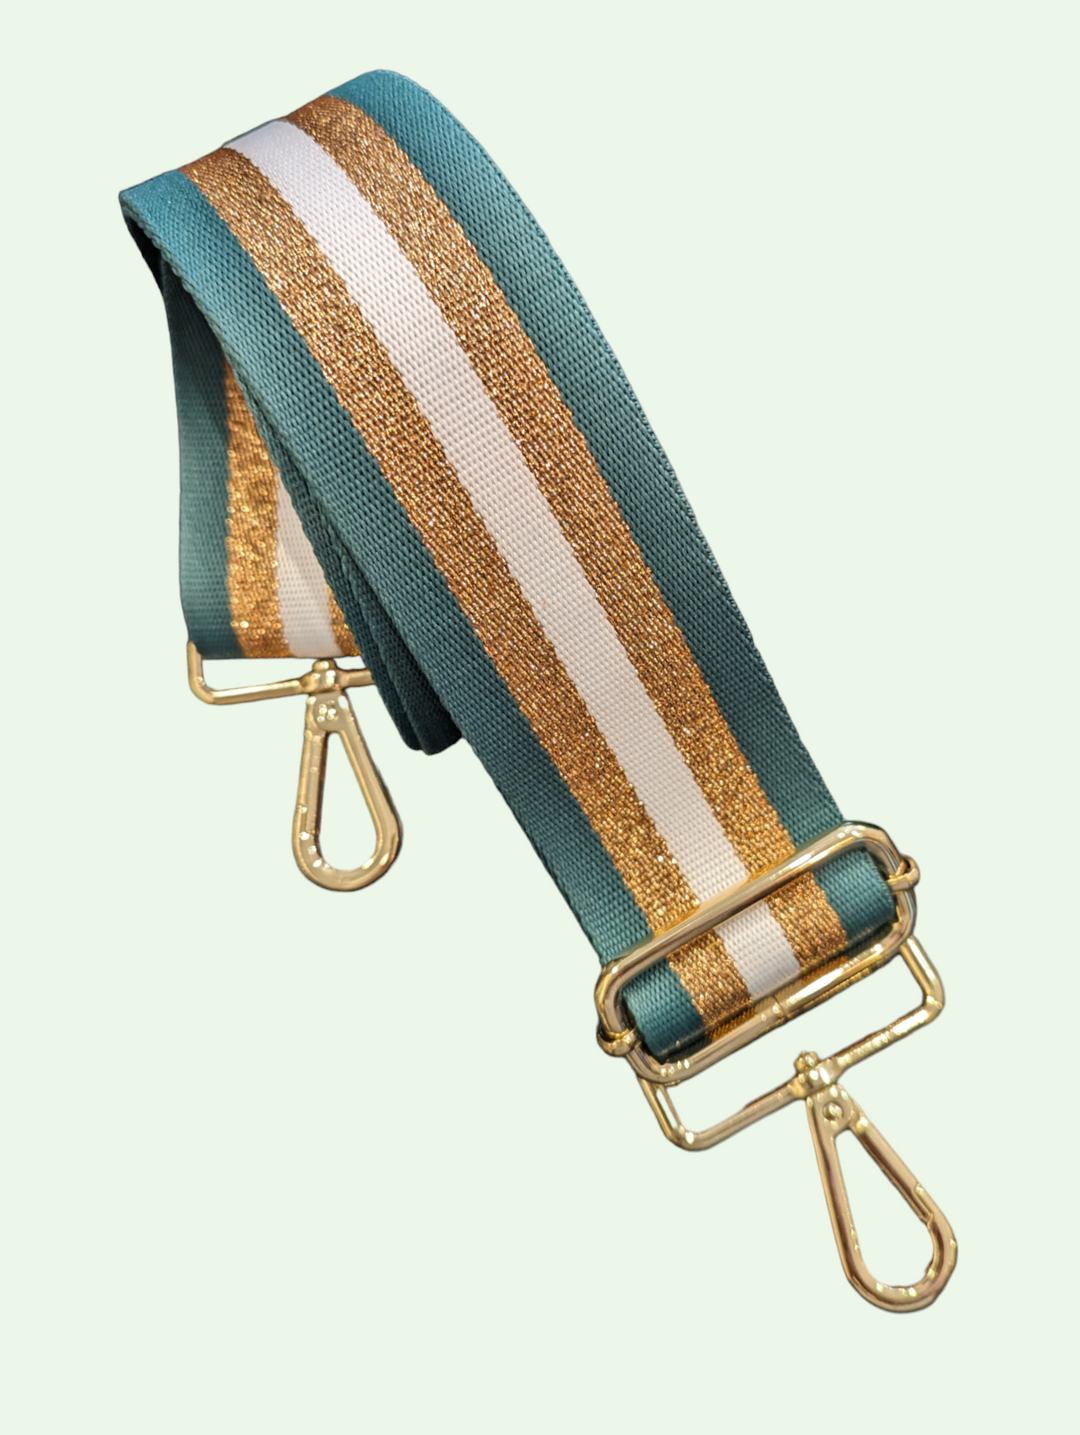 a studio shot of the woven interchangable bag strap showing the green webbing with gold stripes and gold hardware